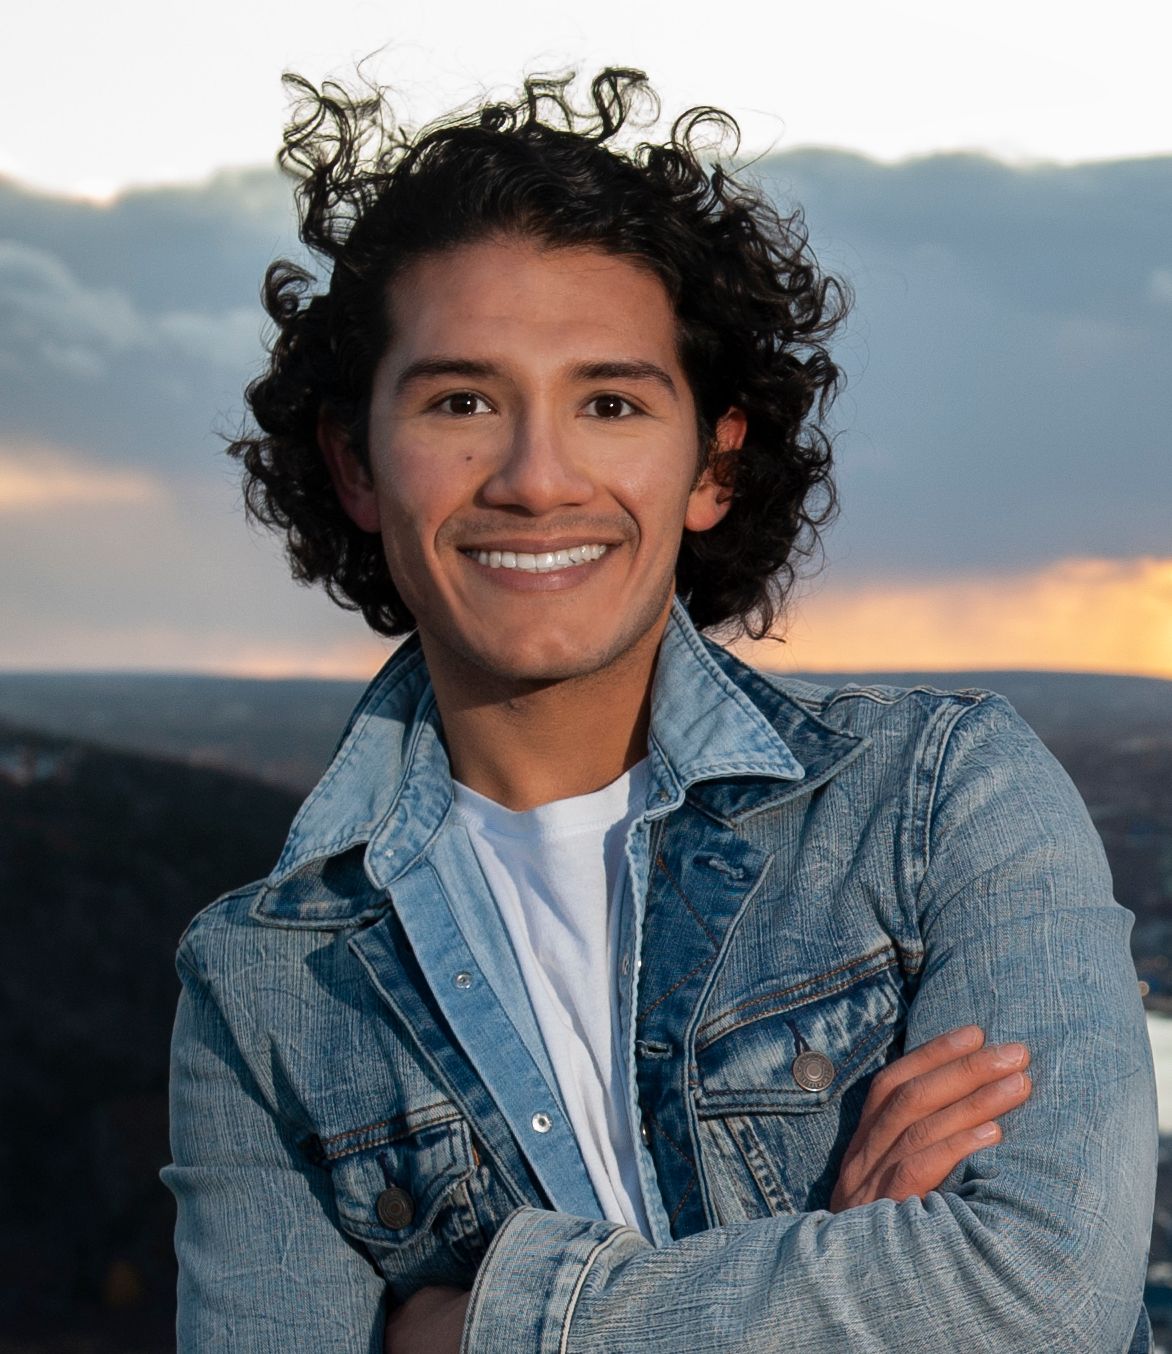 Santiago Guzmán stands outdoors in front of a sunset, pictured from the sternum up with his arms crossed. He has dark eyes and curly hair, which is blowing in the breeze. Santiago smiles widely at the camera; he wears a white t-shirt and denim jacket.